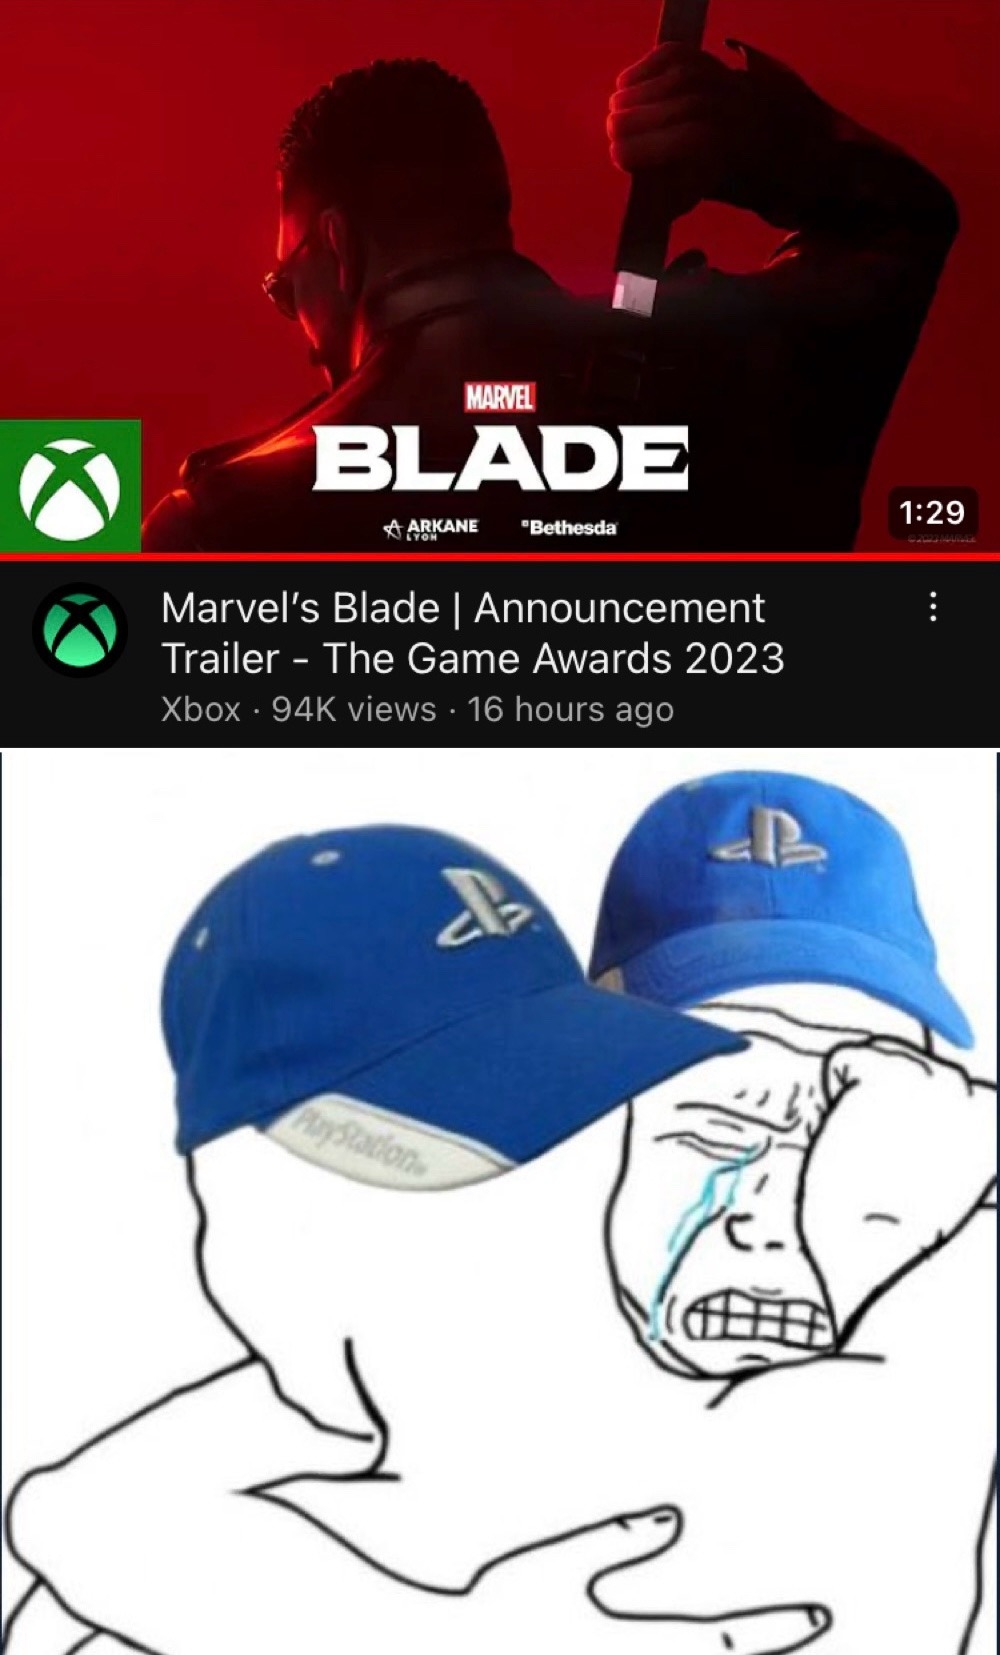 Marvel's Blade  Announcement Trailer - The Game Awards 2023 